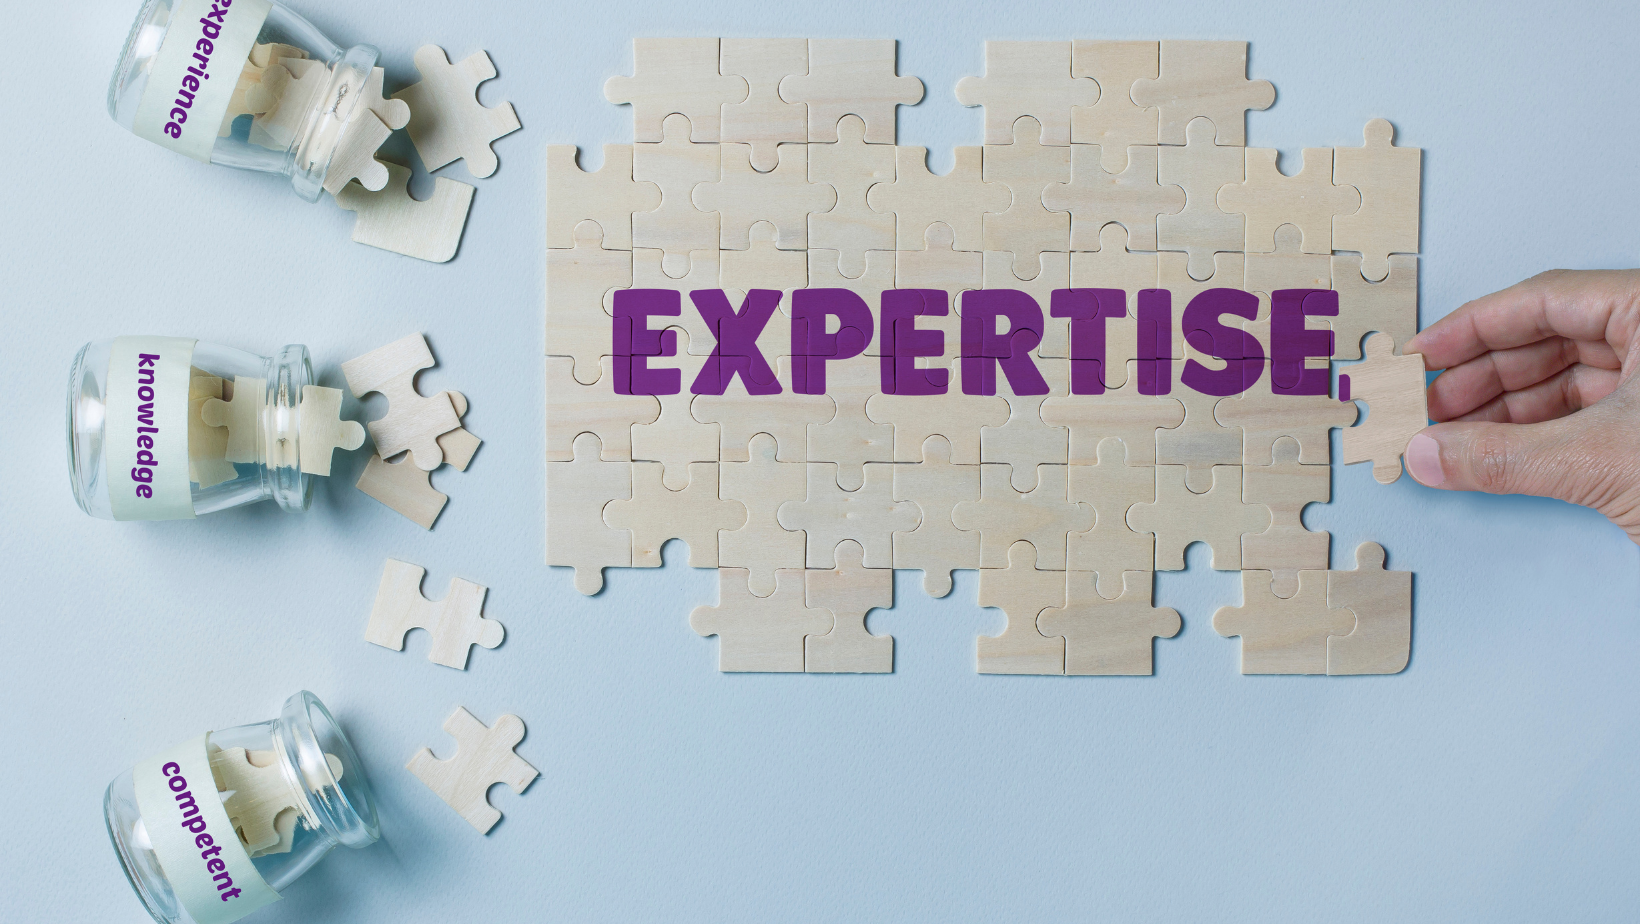 Build Trust and Prove Expertise